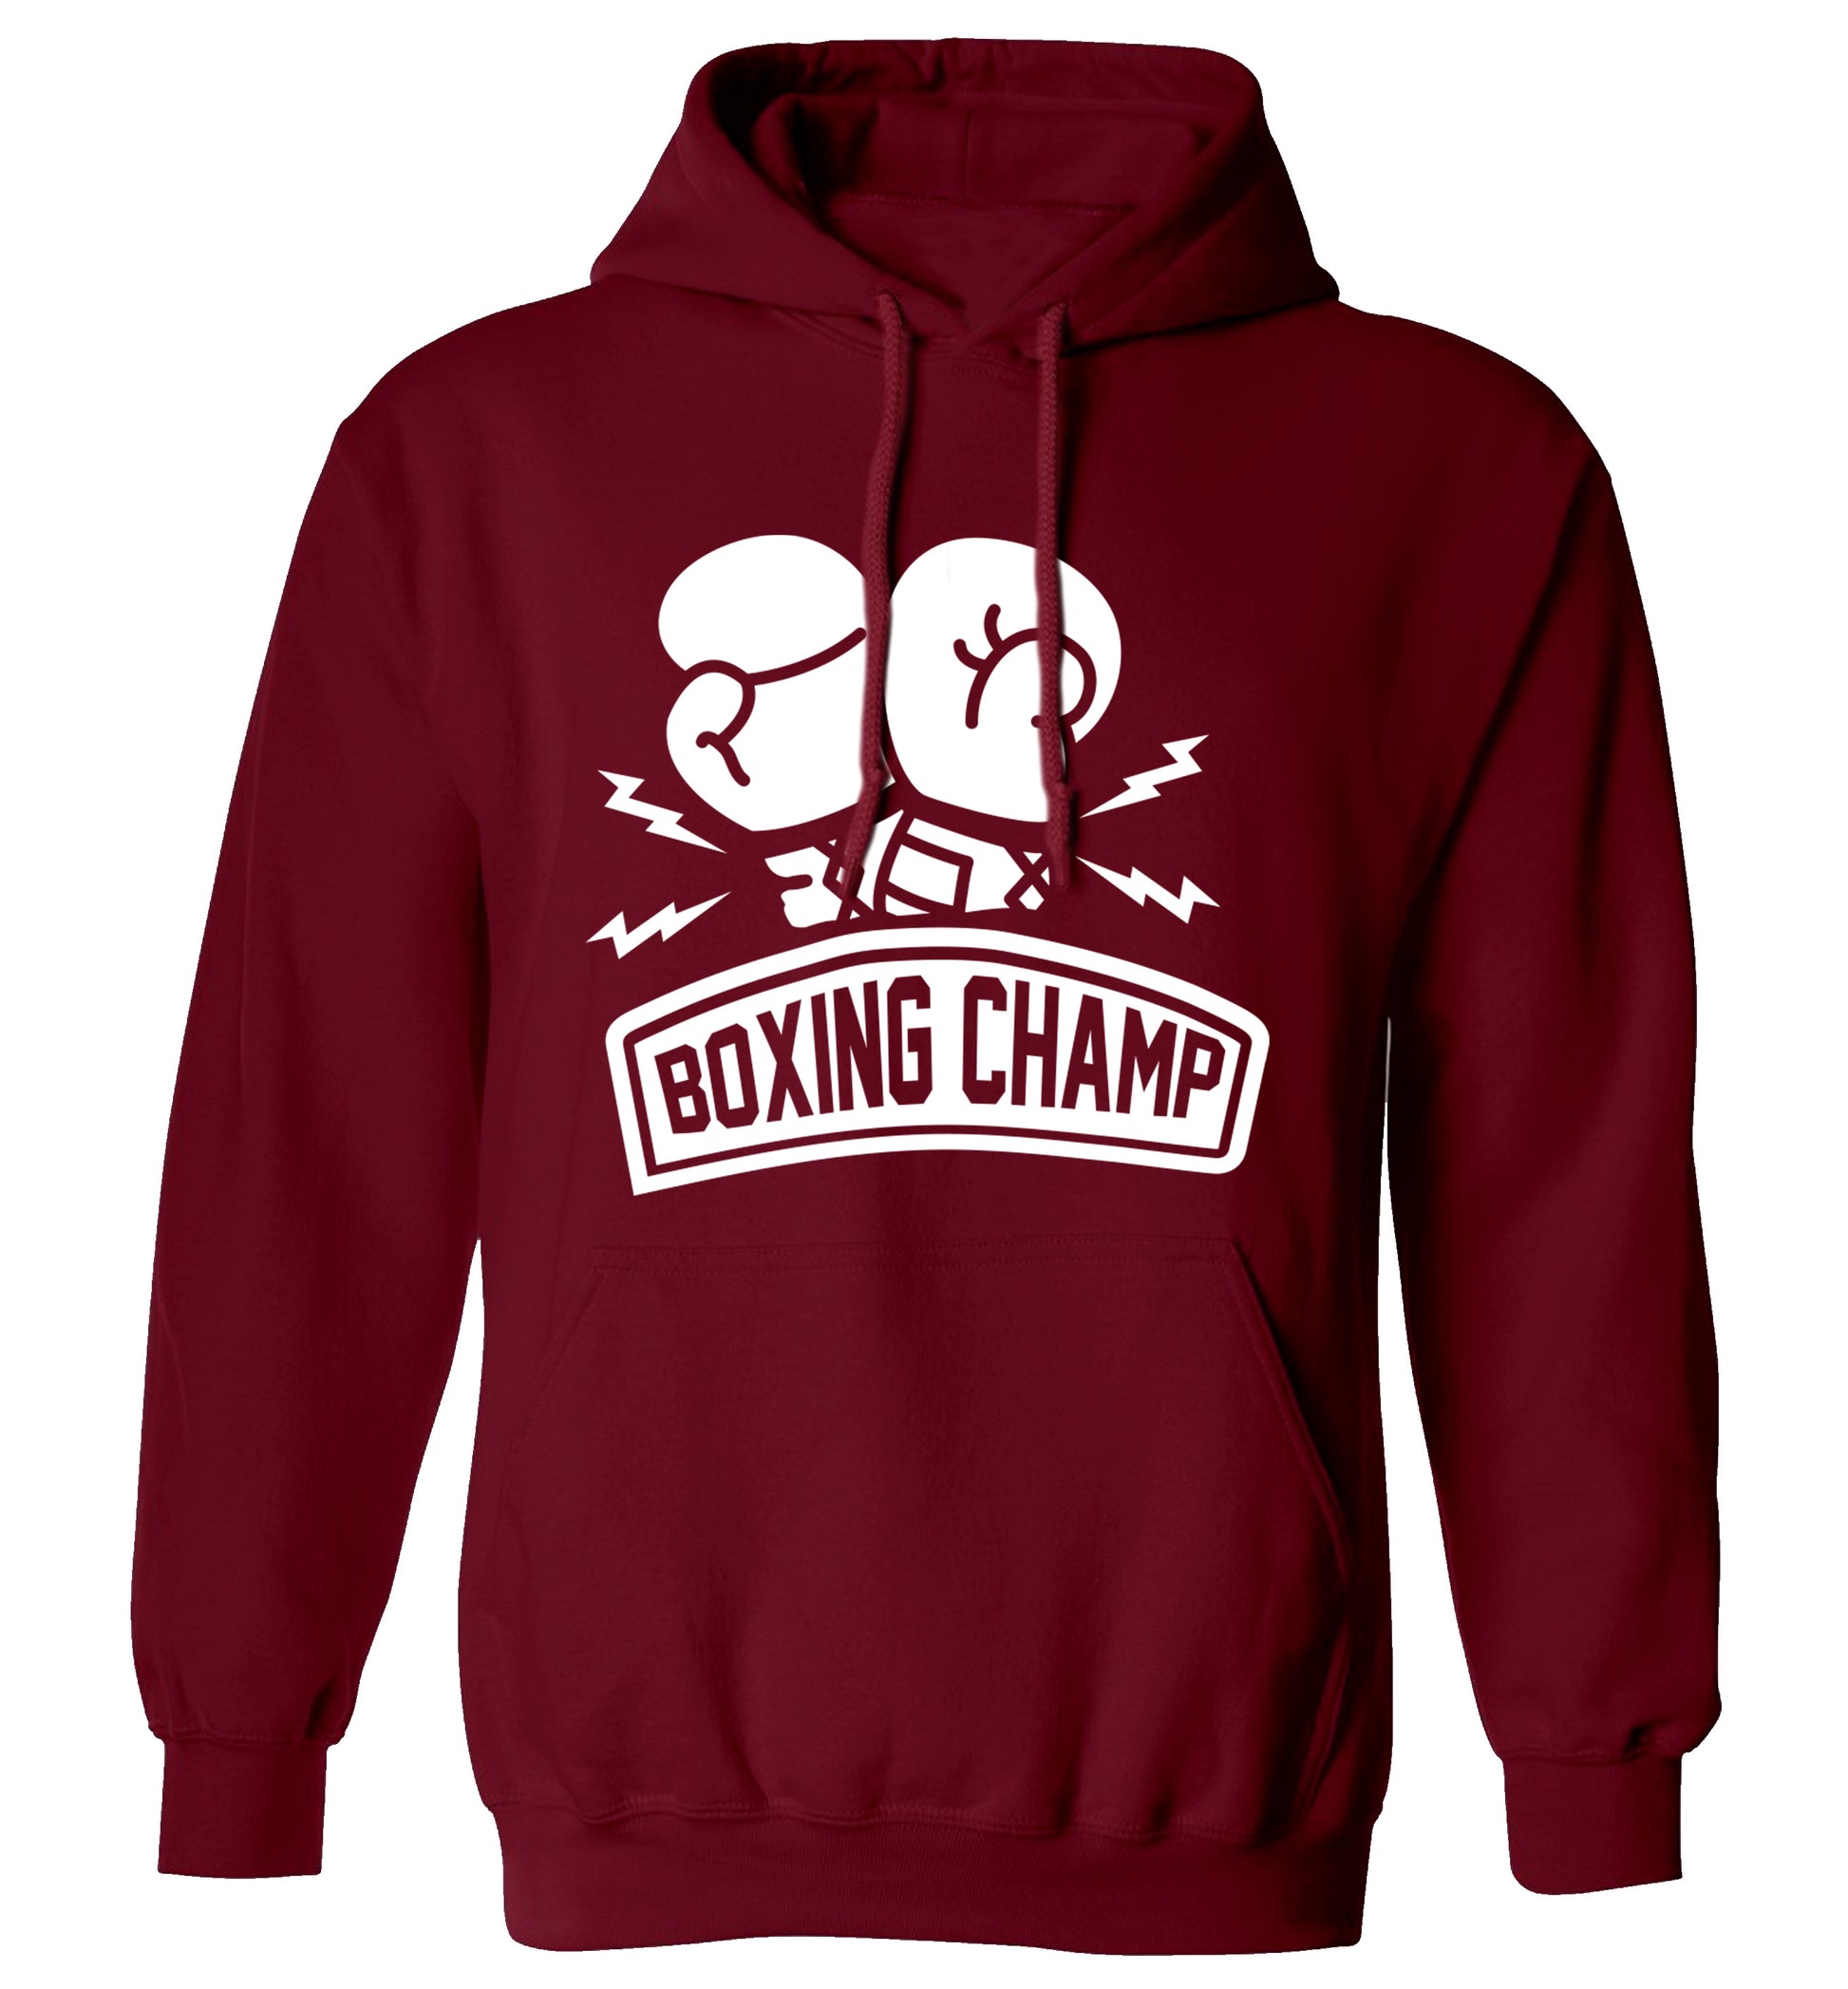 Boxing Champ adults unisex maroon hoodie 2XL